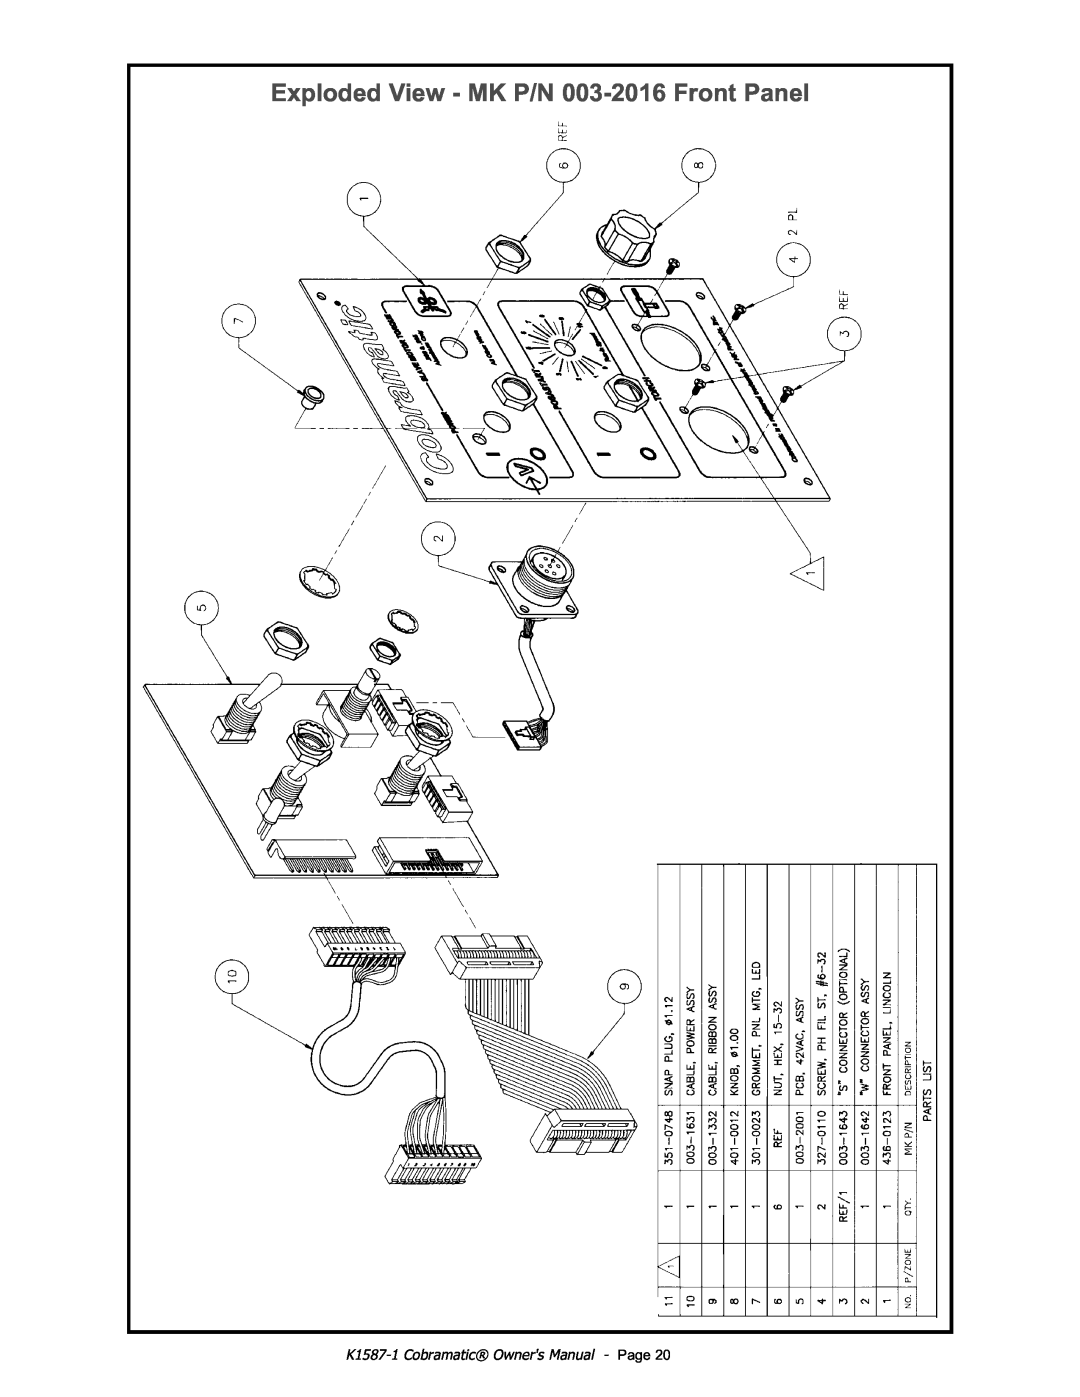 Lincoln Electric IM597 manual Exploded View - MK P/N 003-2016 Front Panel, K1587-1 Cobramatic Owners Manual - Page 